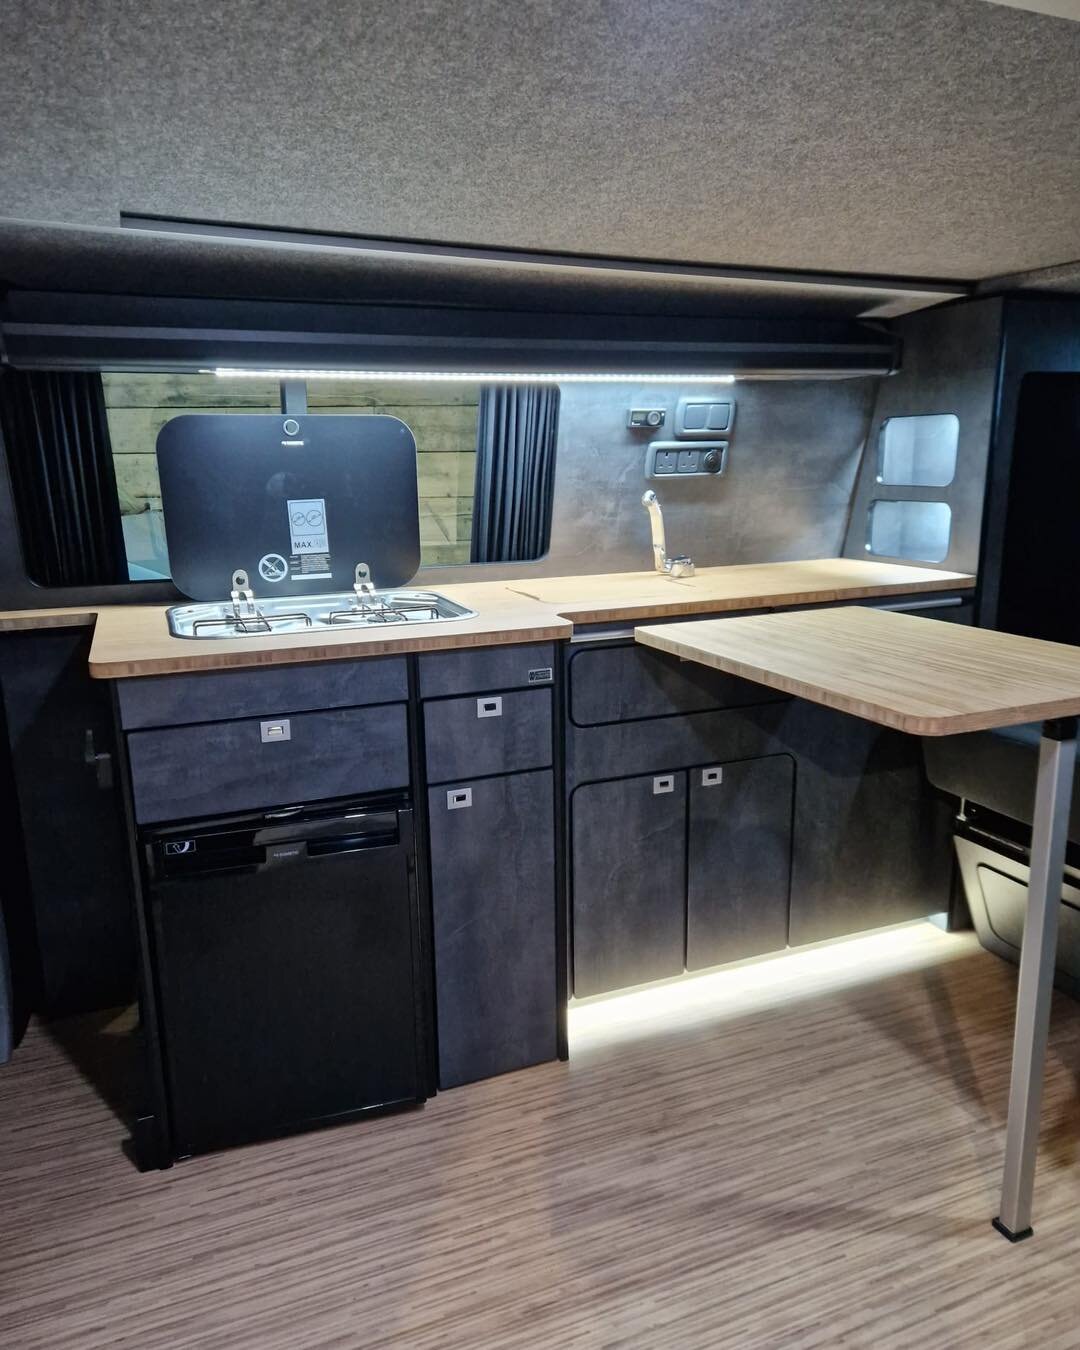 Empty Van to Campervan! 🚍
Want to make your panel van in to a full camper? No problem! 🤩

Full LWB Custom Side Camping Interior
Extra Leg Room Behind Drivers Seat
Seperate Dometic Hob &amp; Sink
Adapt Existing 12v &amp; 240v Electrics
3/4 Smart Bed